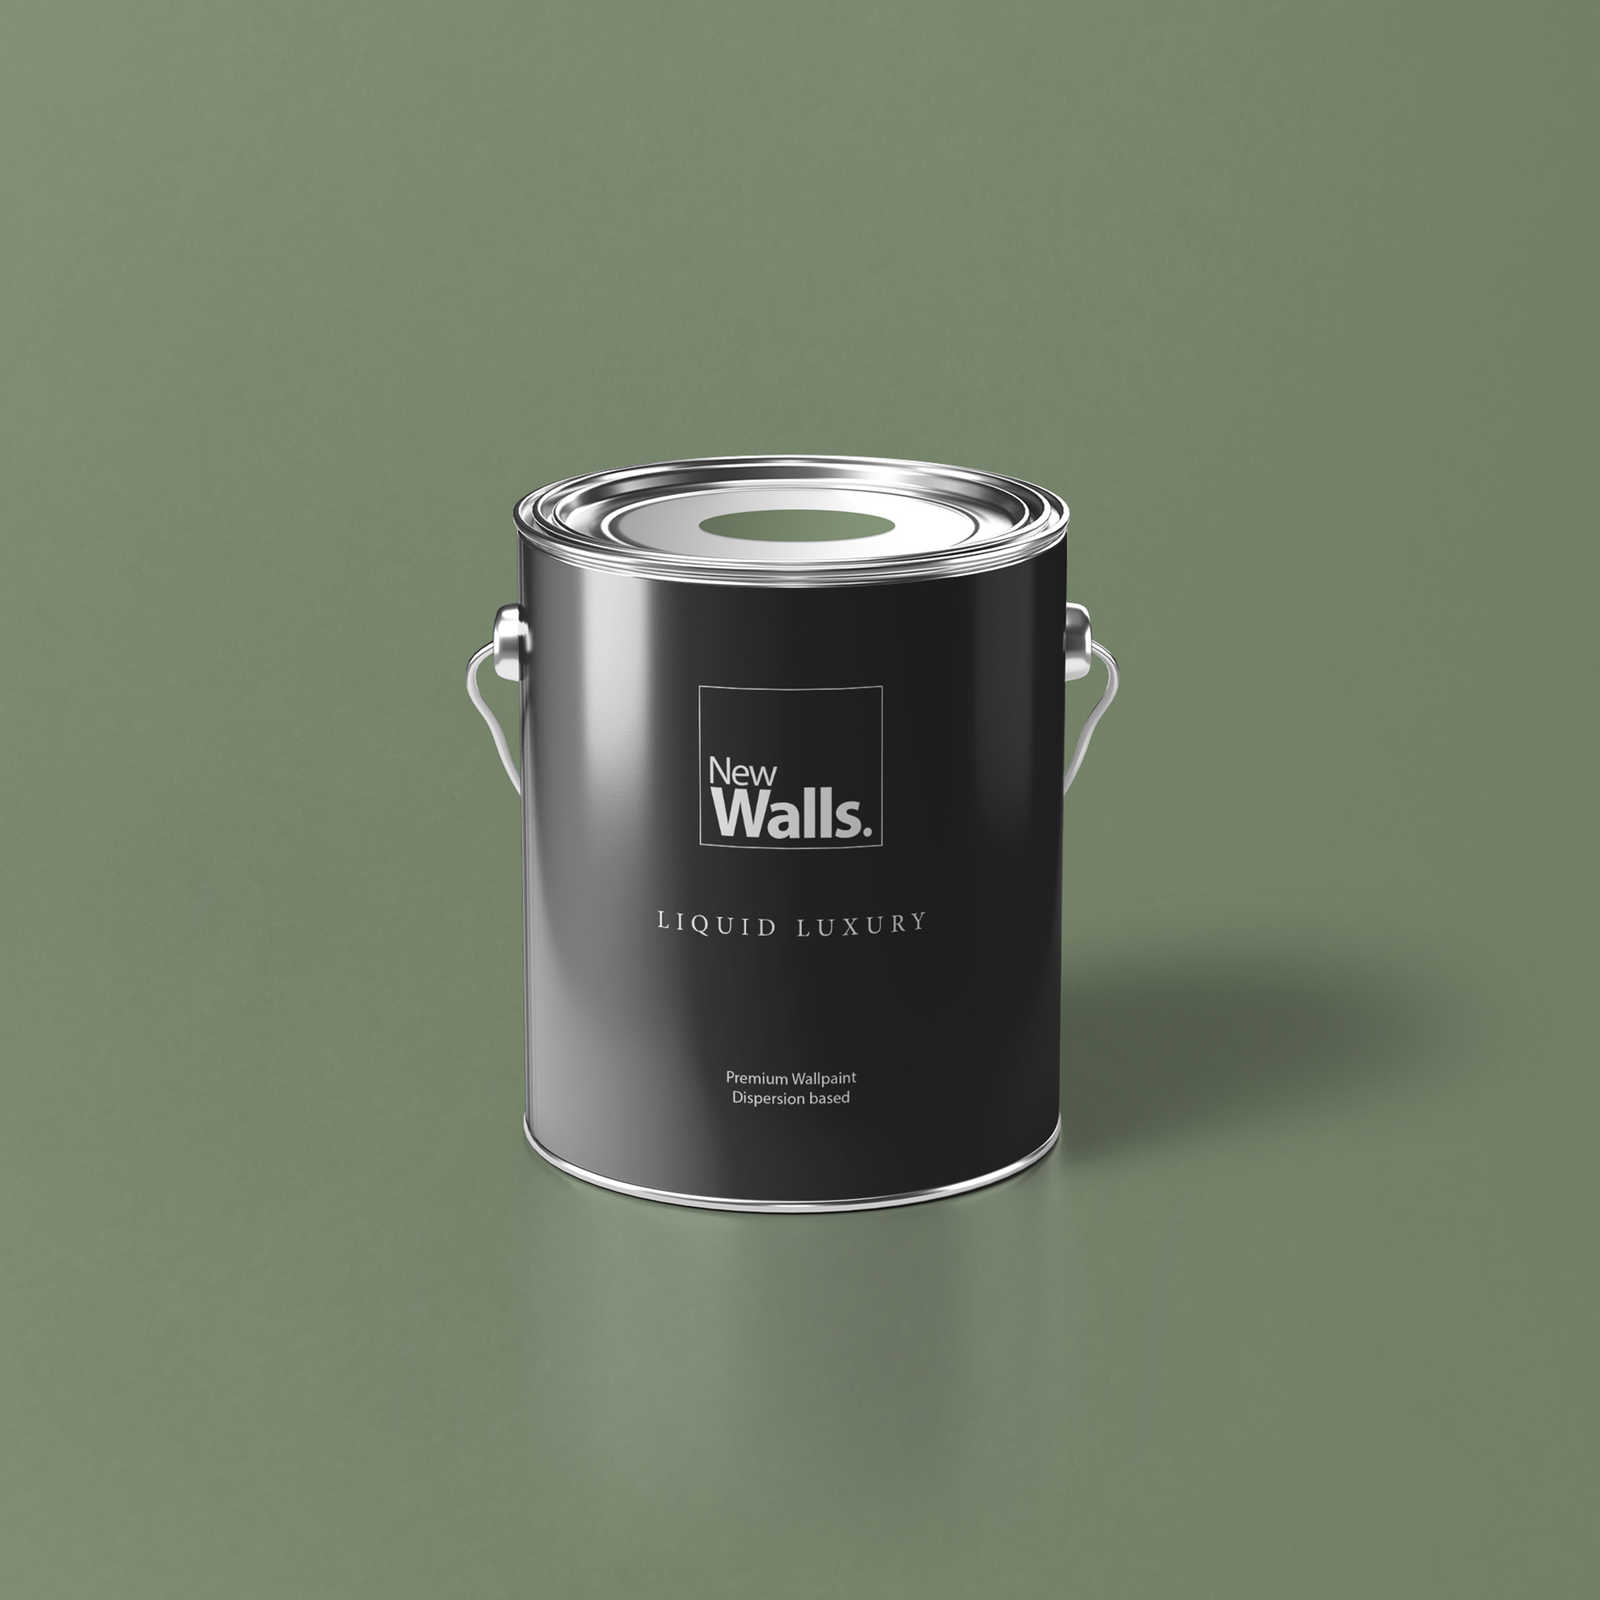 Premium Wall Paint Nature Olive Green »Gorgeous Green« NW503 – 2.5 litre
